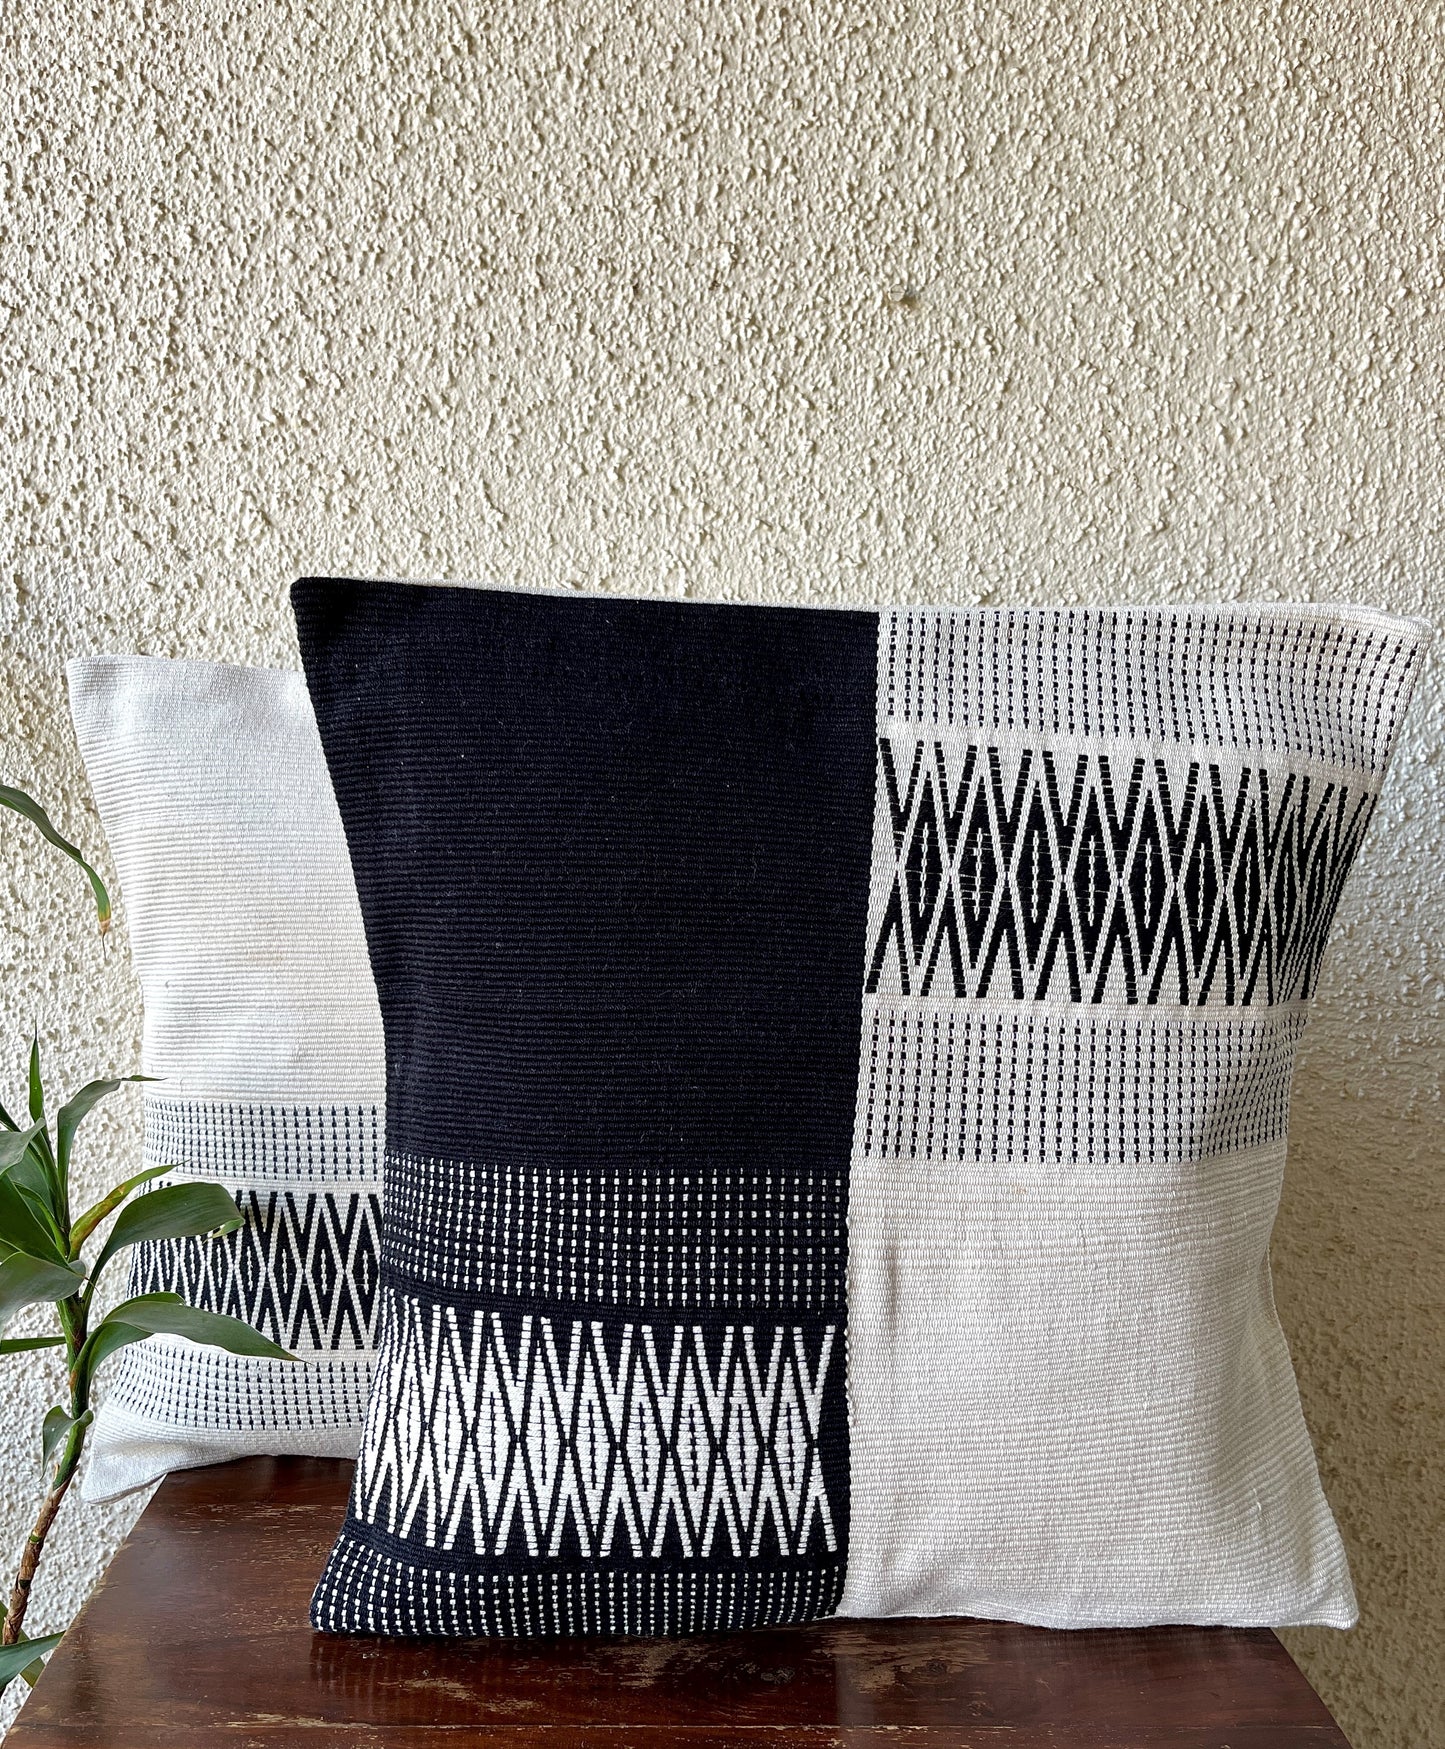 Chizami Weaves - Loin Loom Handwoven Cushion Cover Set in Black and White (Set of 4)